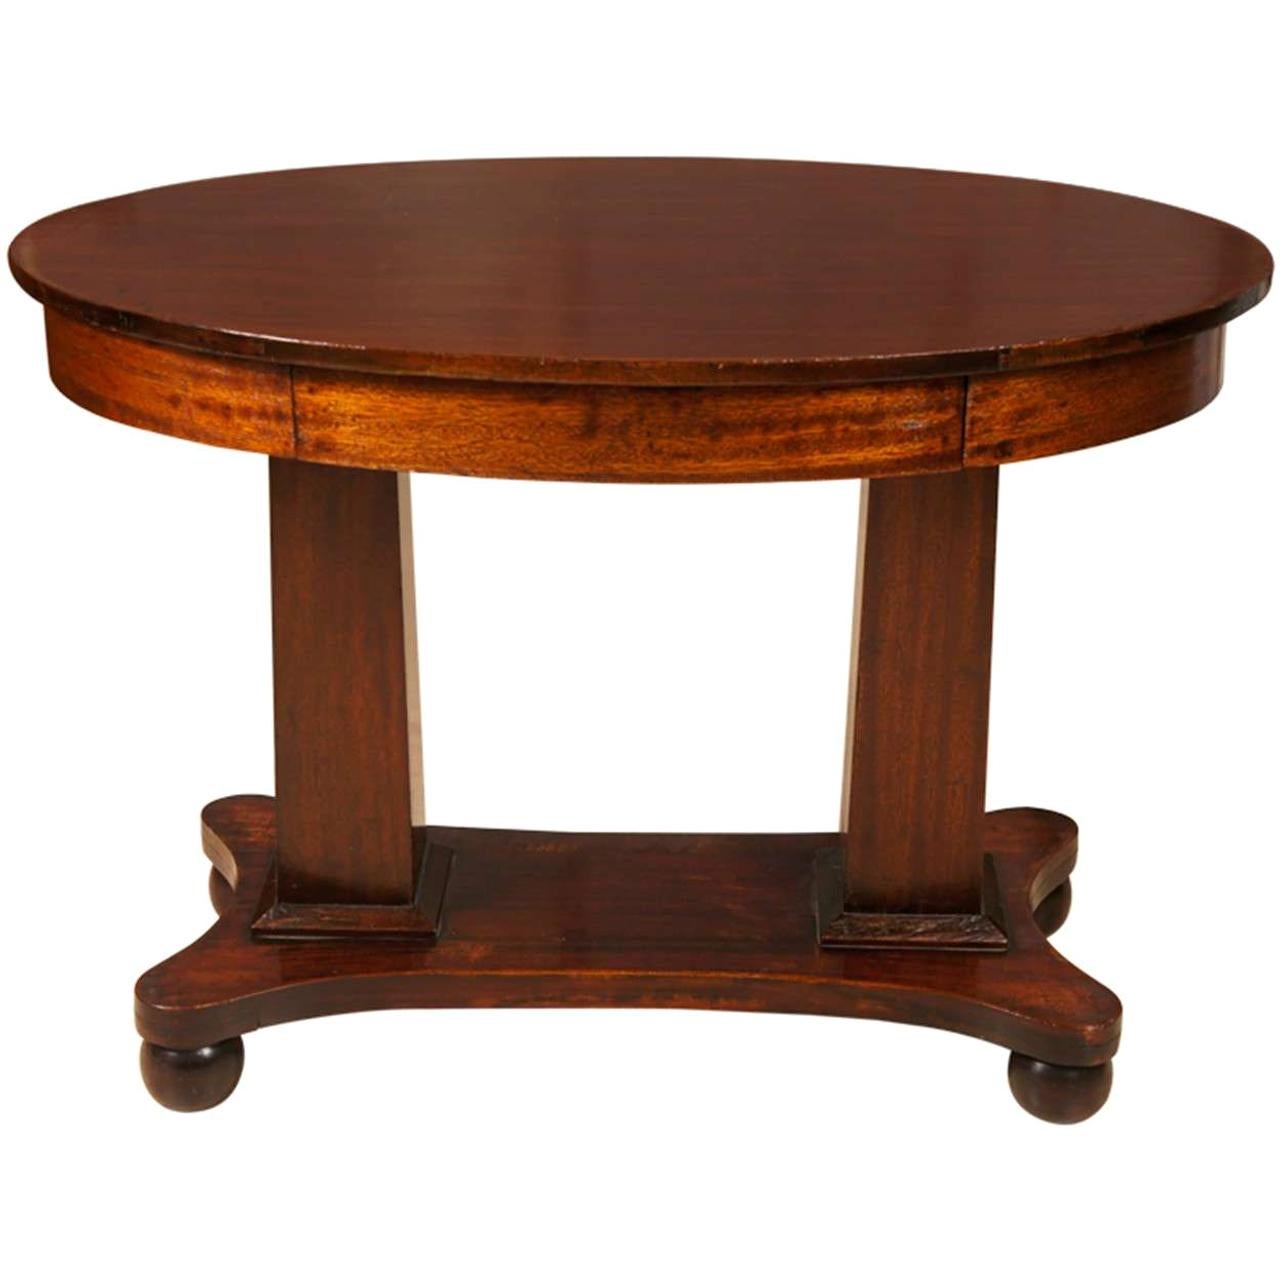 Empire Mahogany Pillar and Scroll Table with One Drawer For Sale